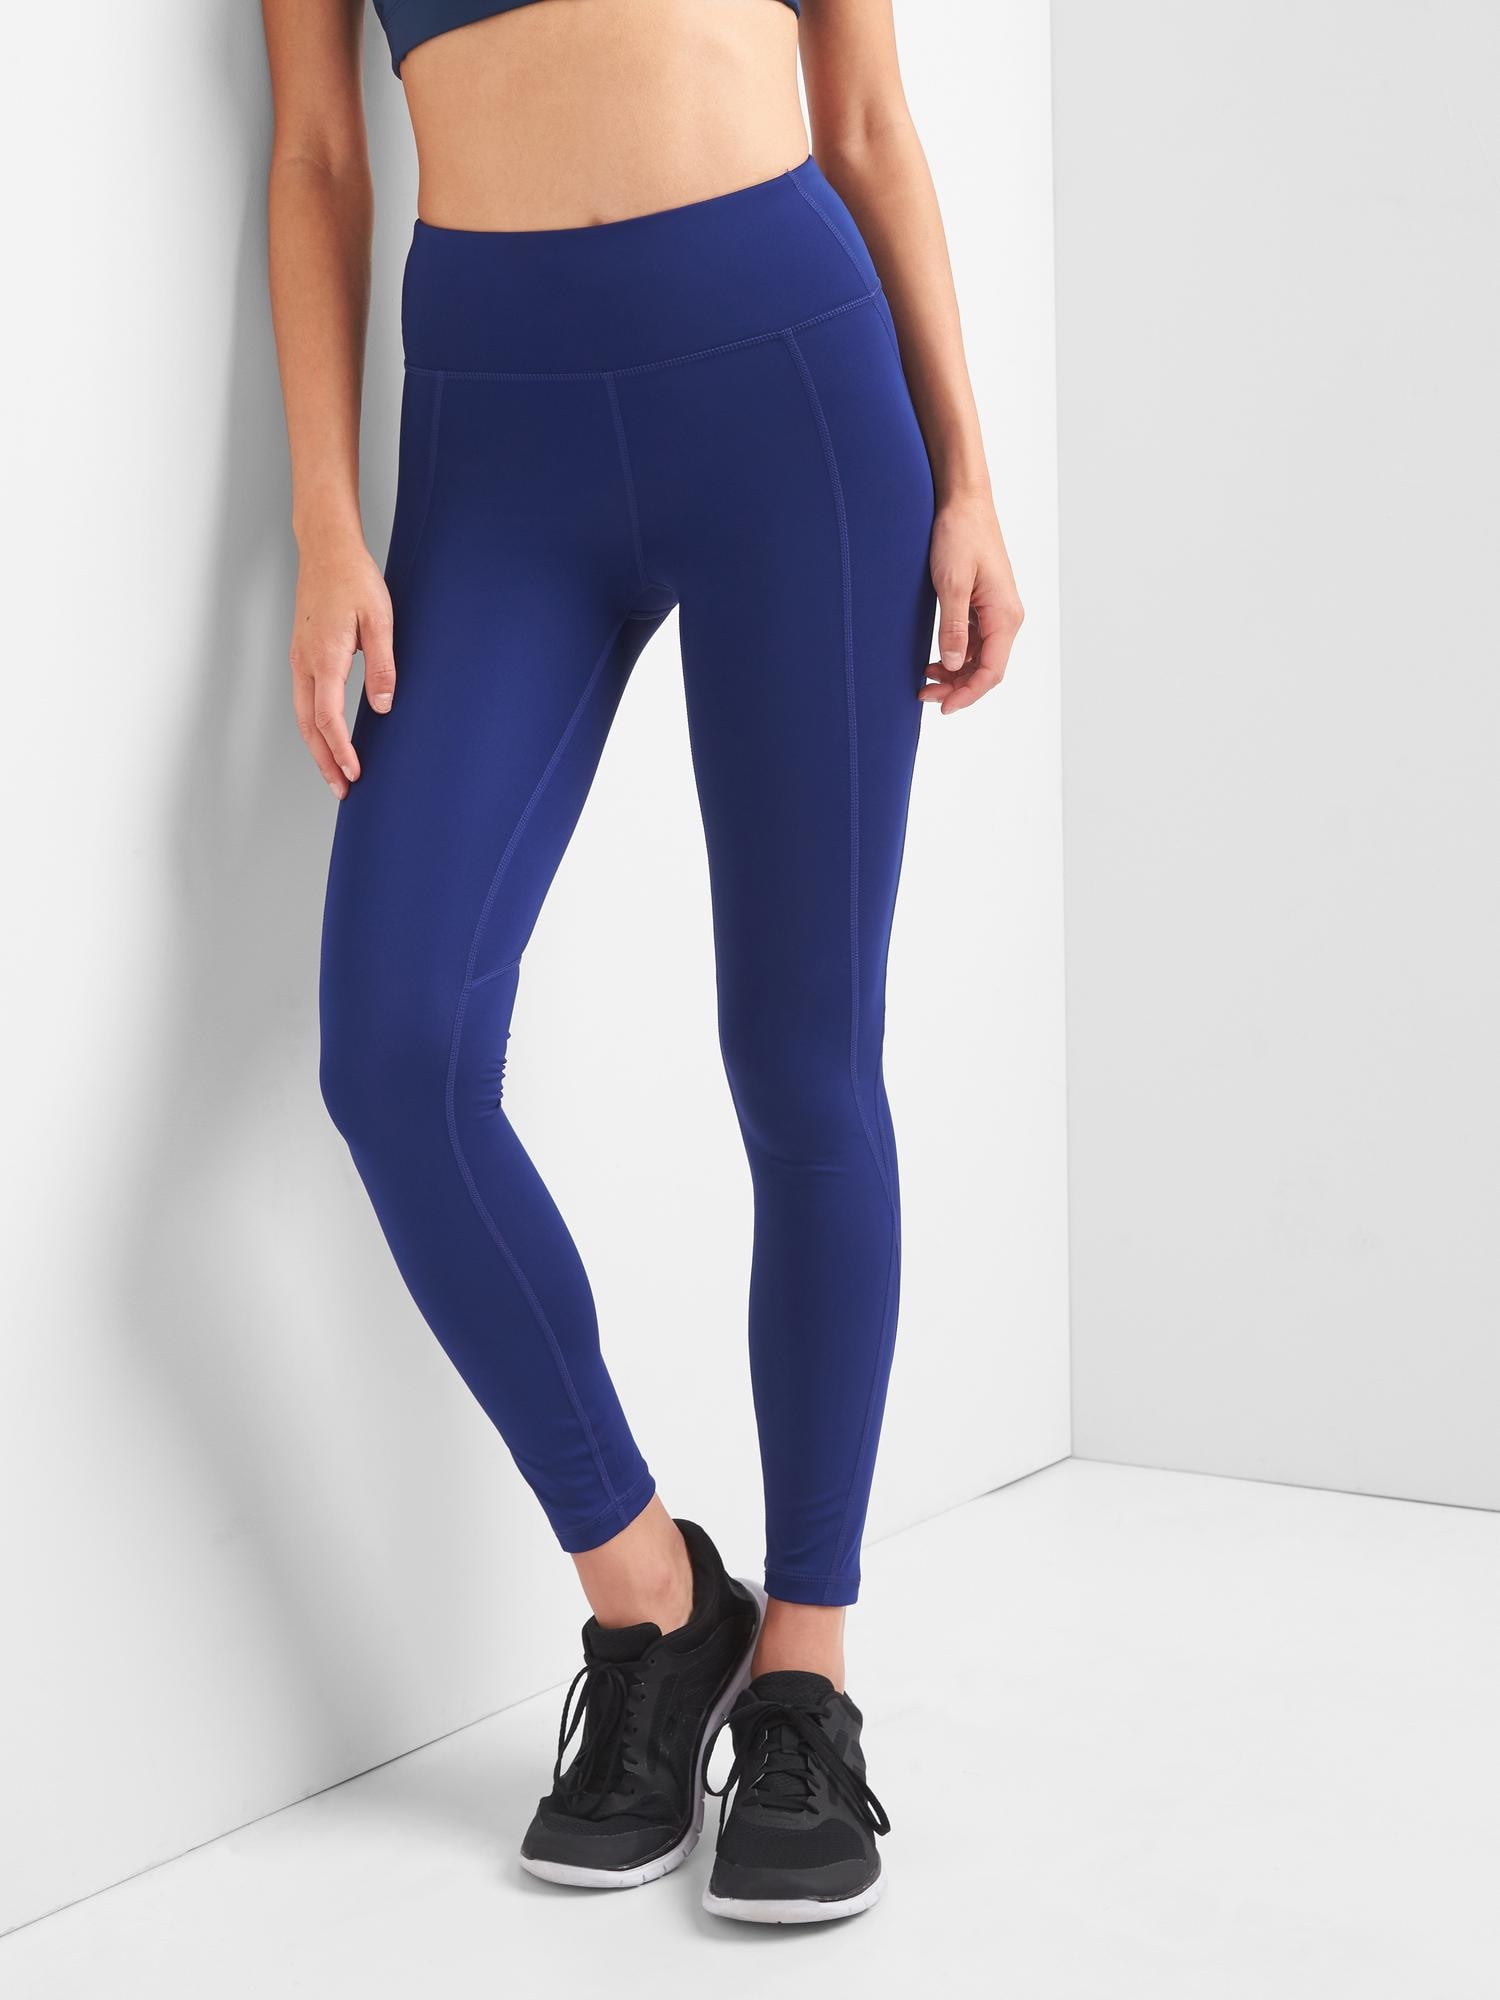 Fabletics Soft Size XS Blue Leggings with Pocket in Waist